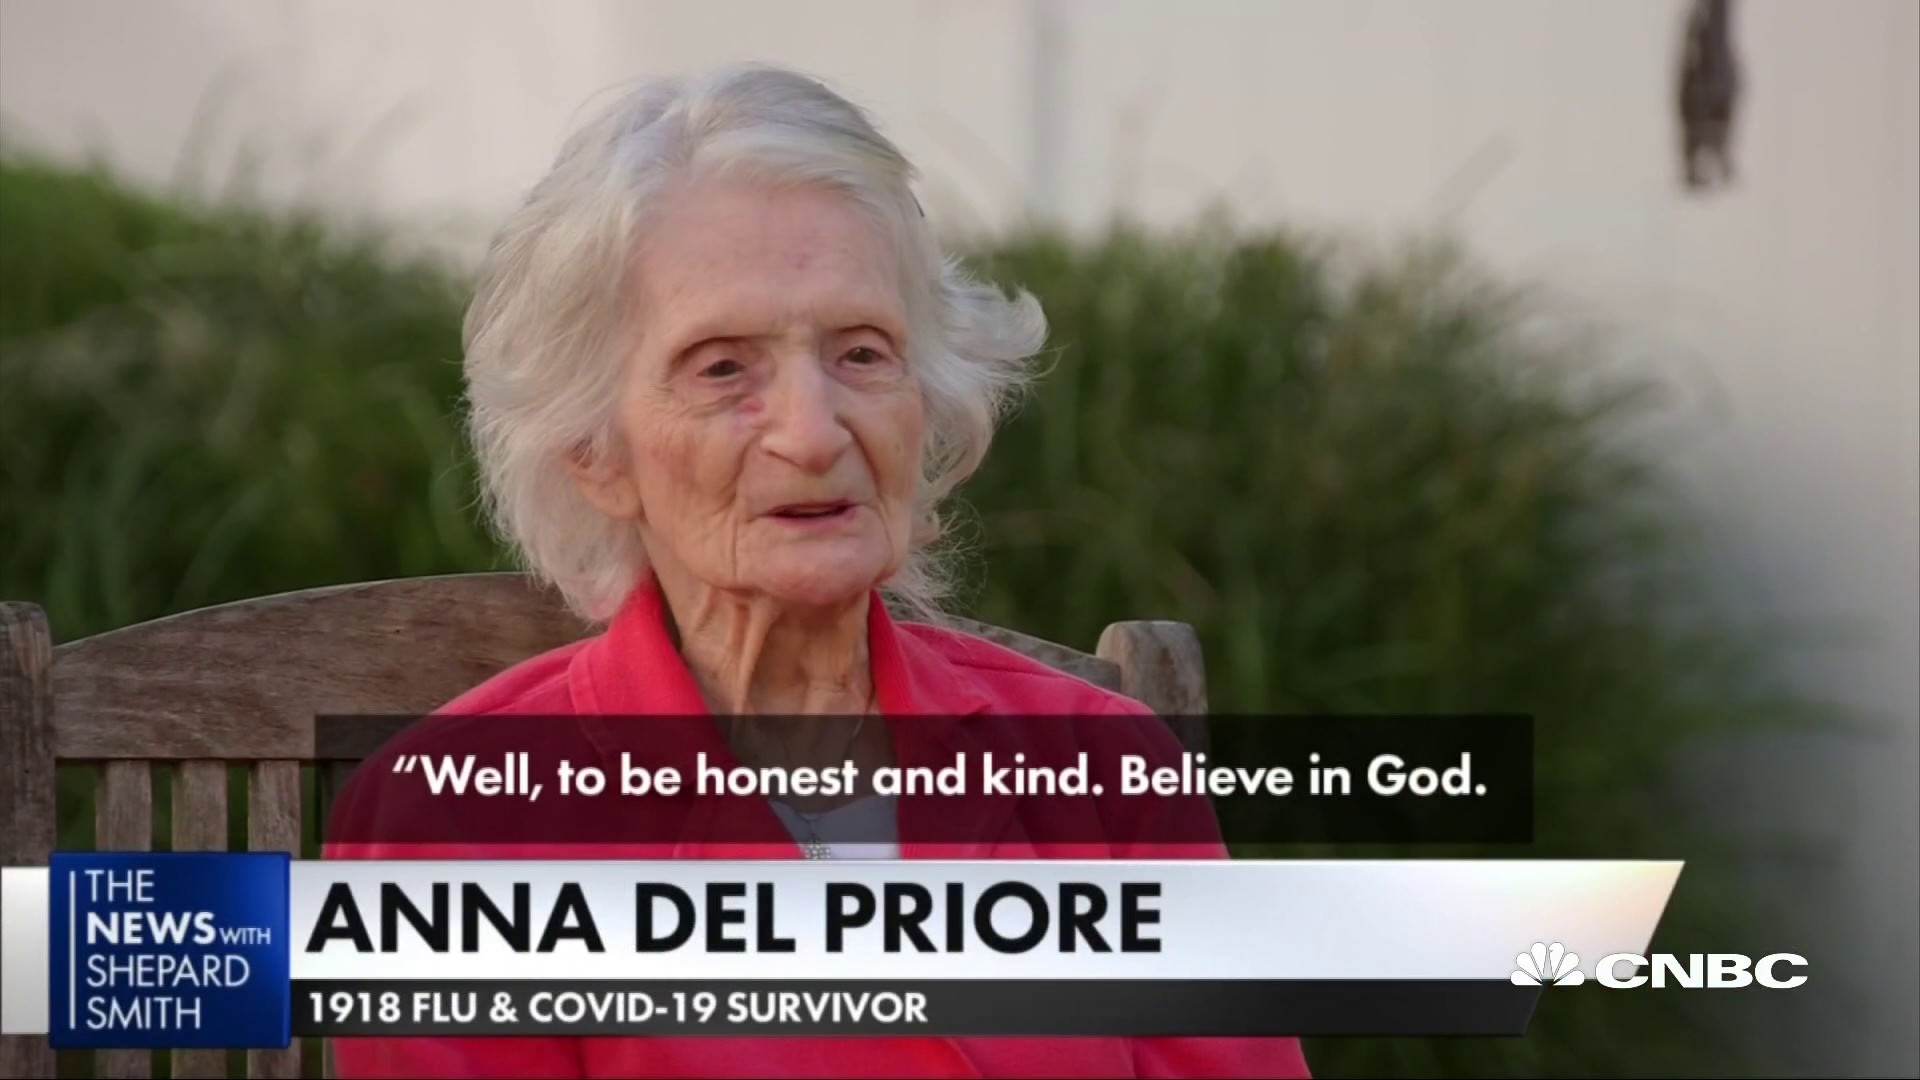 This 108-year-old girl survived two pandemics: The 1918 Spanish flu and Covid-19